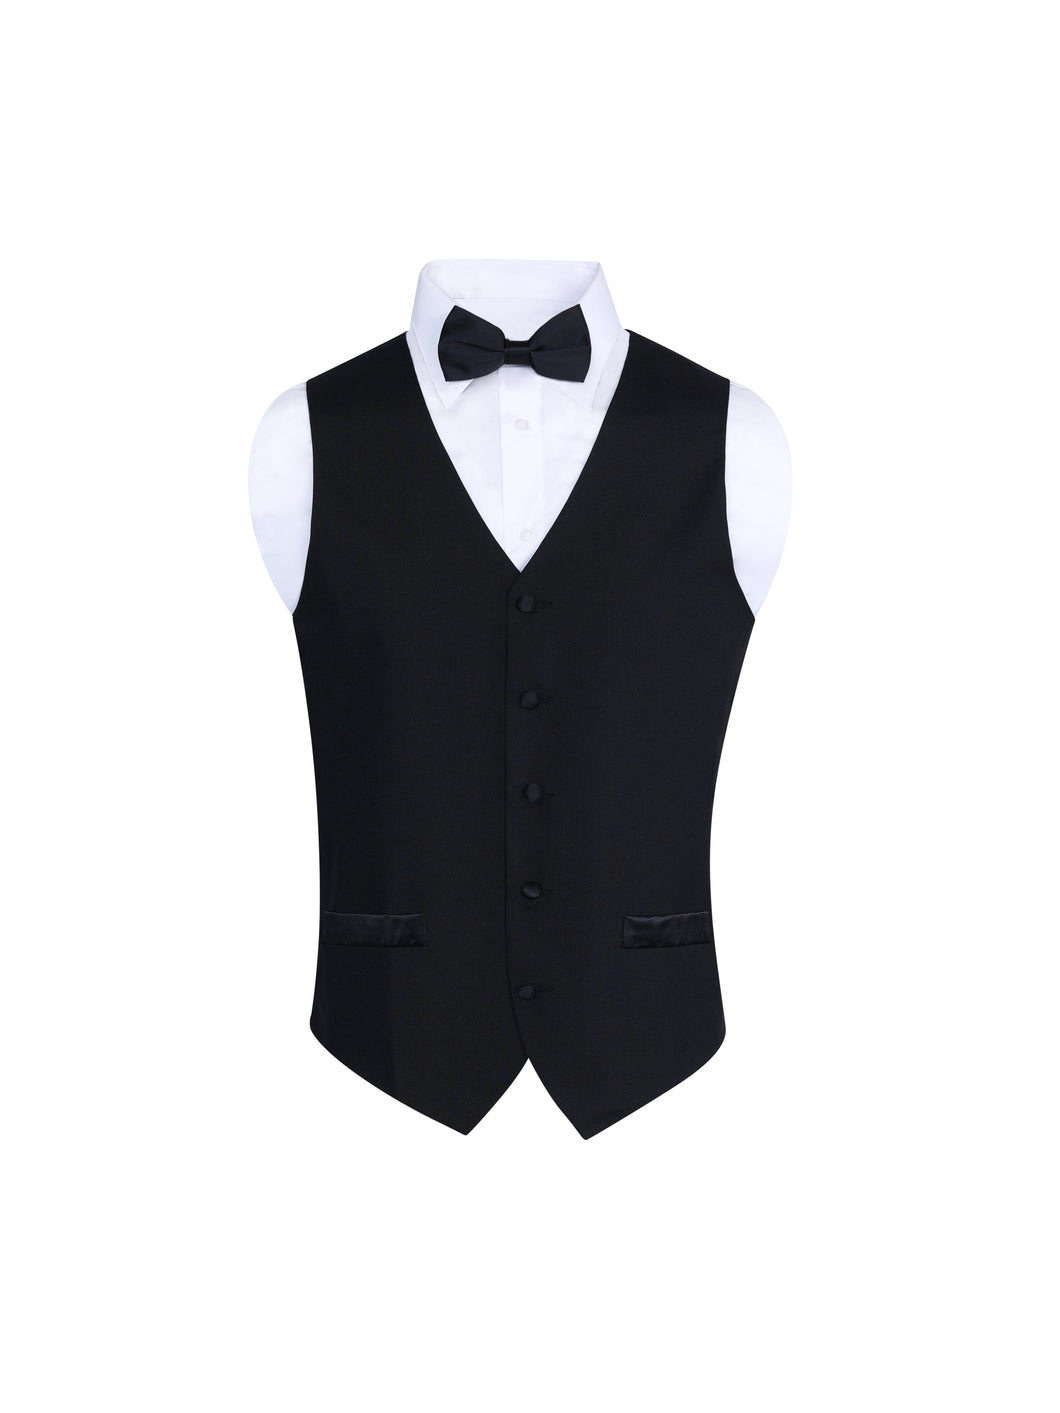 S.H. Churchill & Co. Men's Wool Formal Black Vest and Tie Set - Includes Black Vest and Matching Black Satin Bow Tie